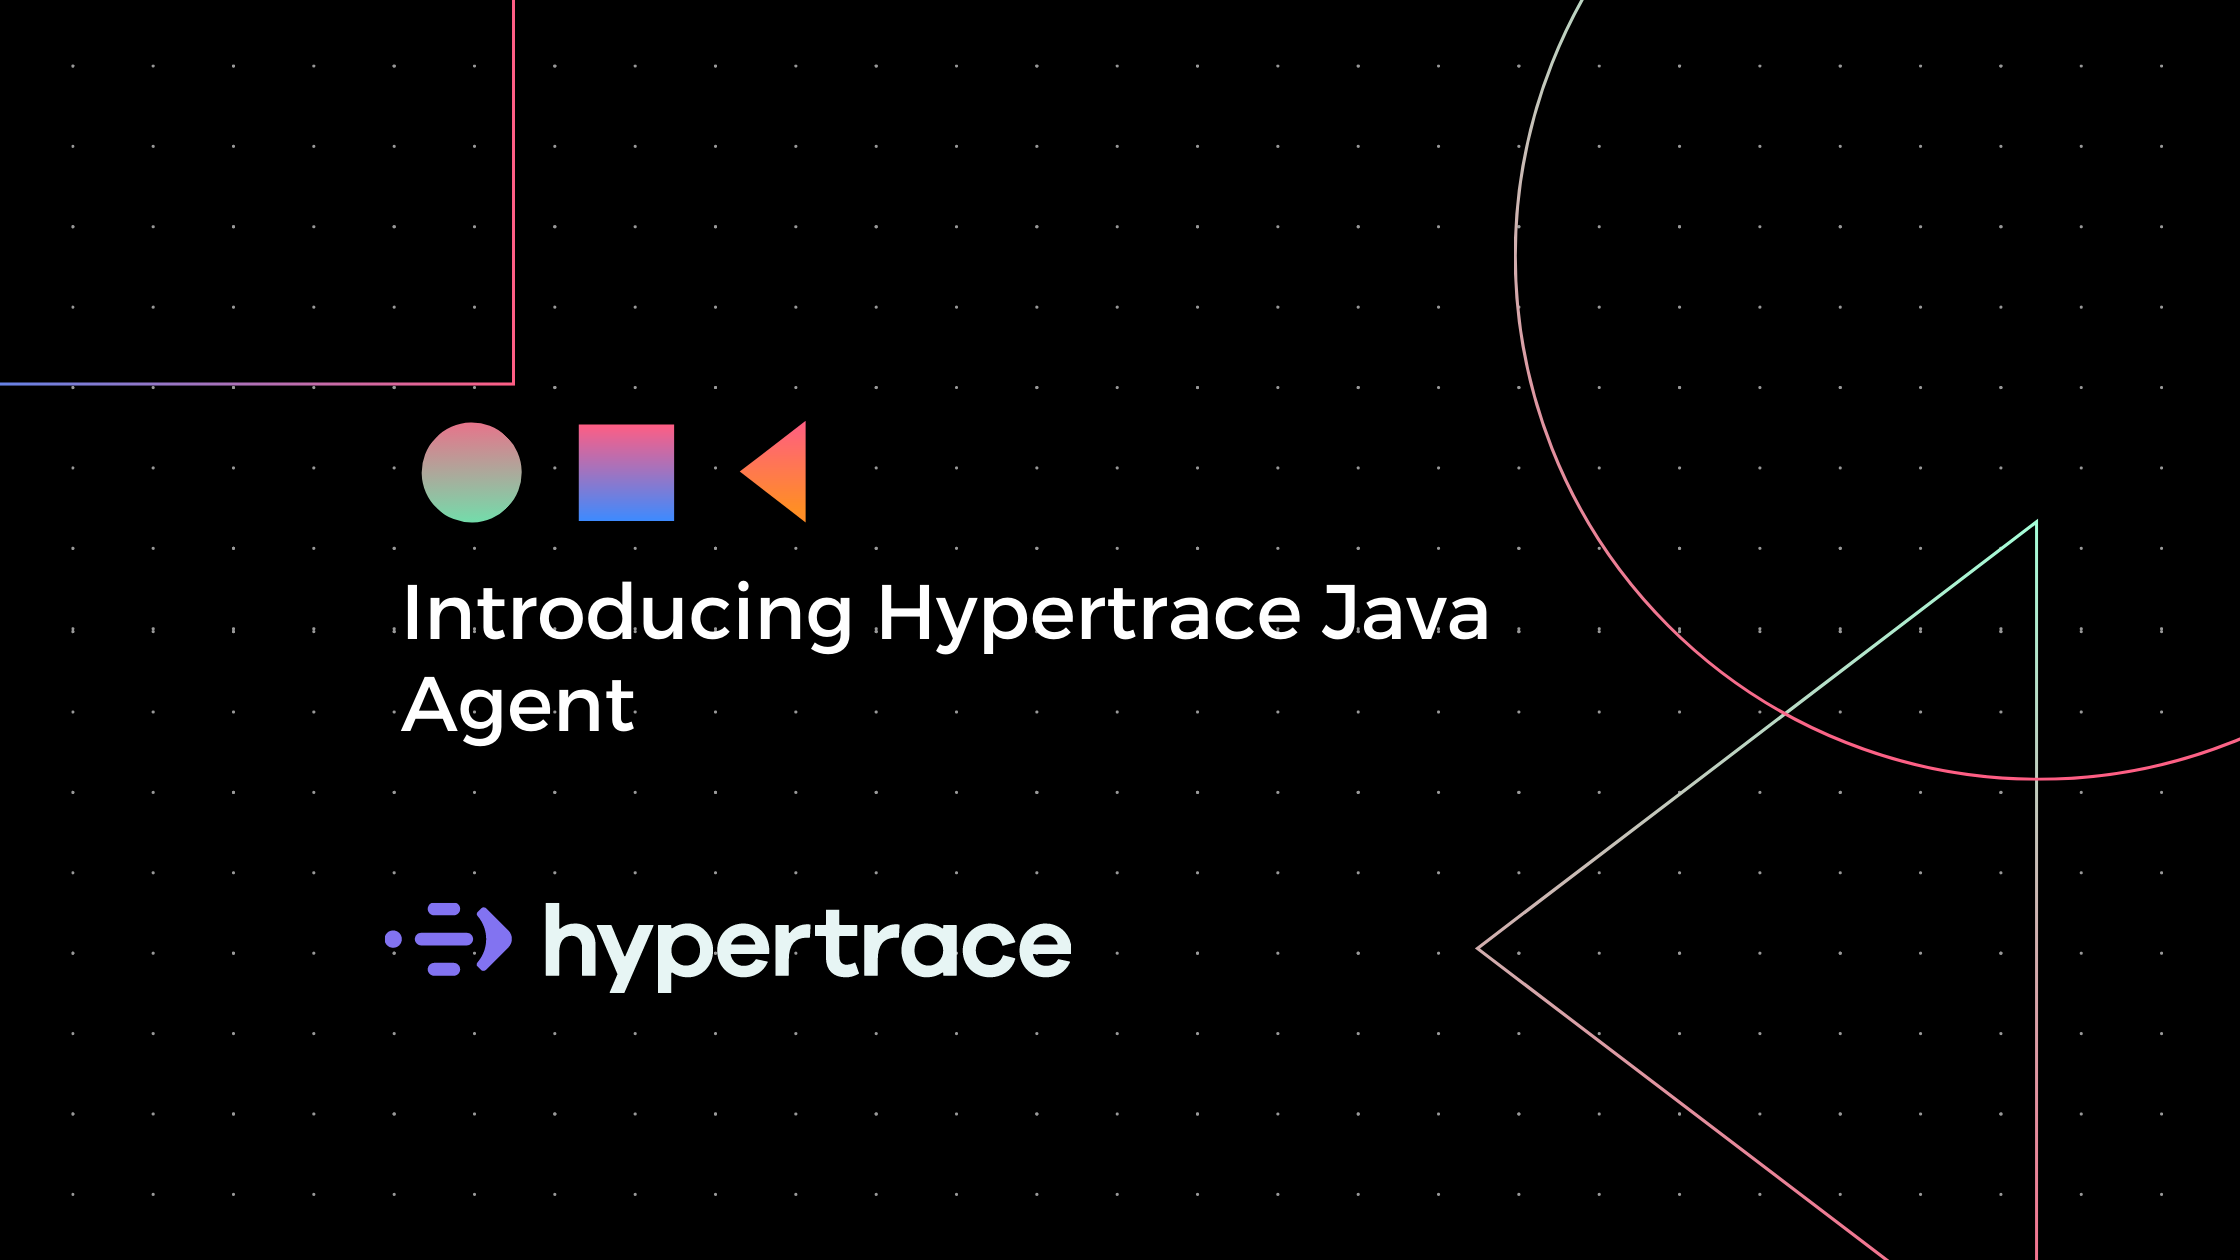 Introducing Hypertrace Java Agent